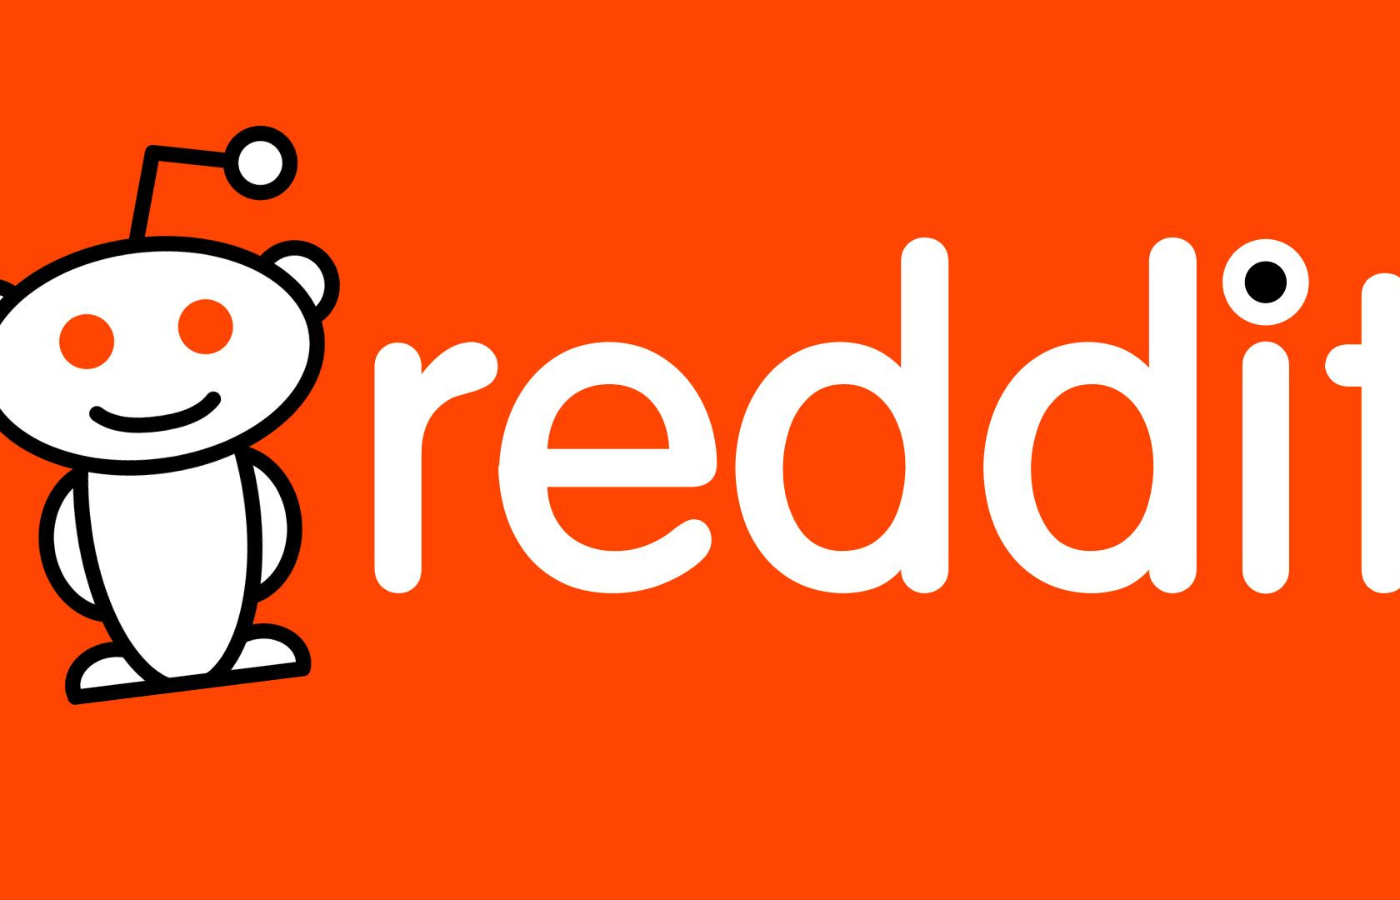 Reddit debuts a new type of ad that looks a lot like user posts